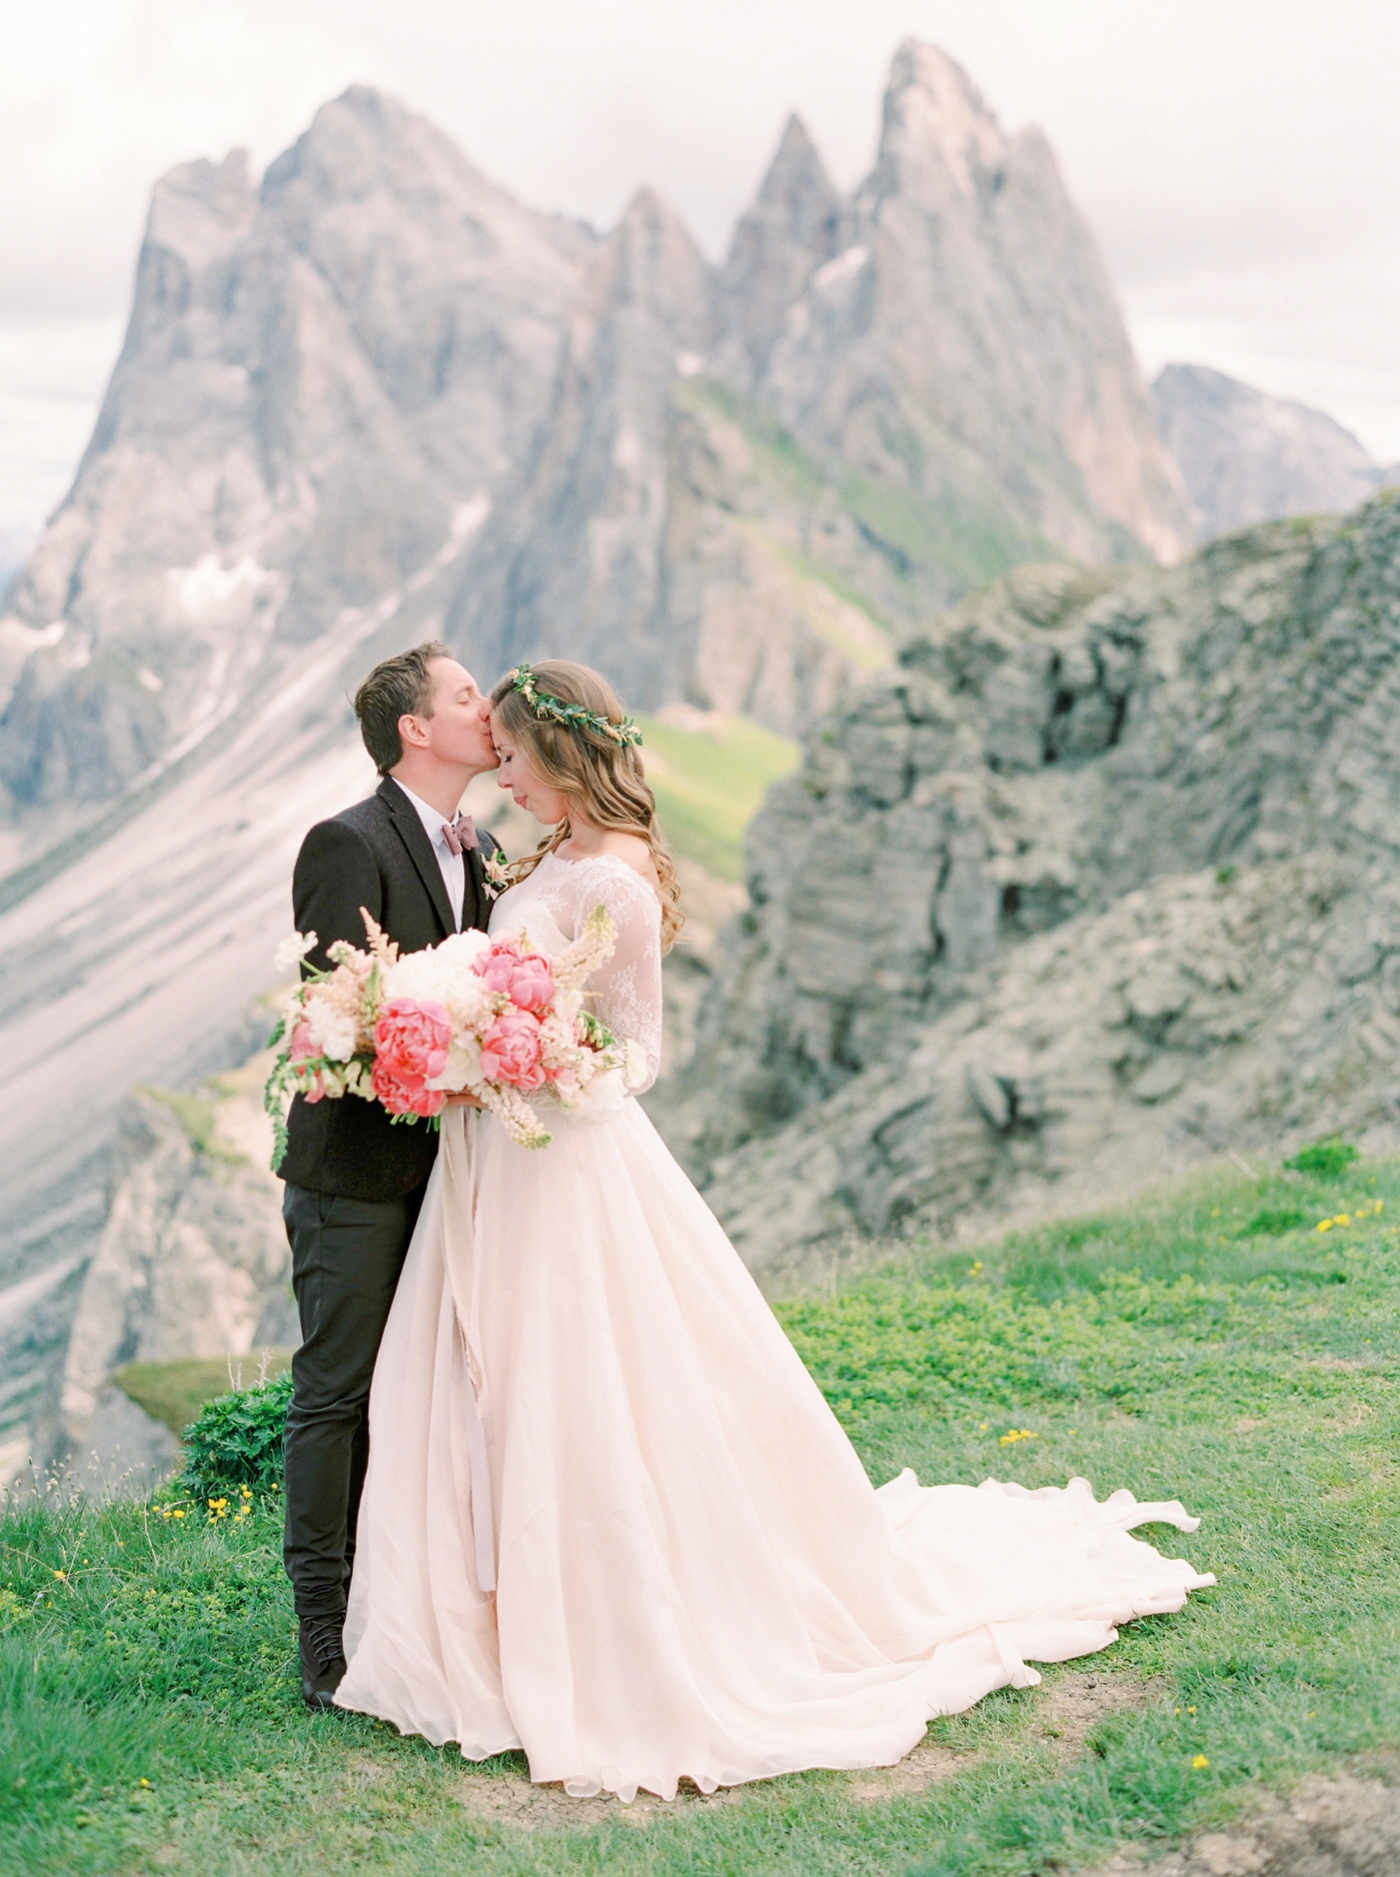 Italy wedding photographers | Dolomites mountain top wedding | pink and white peony bouquet | long sleeve flowing wedding dress | Bride and groom portrait | justine milton fine art film photographers